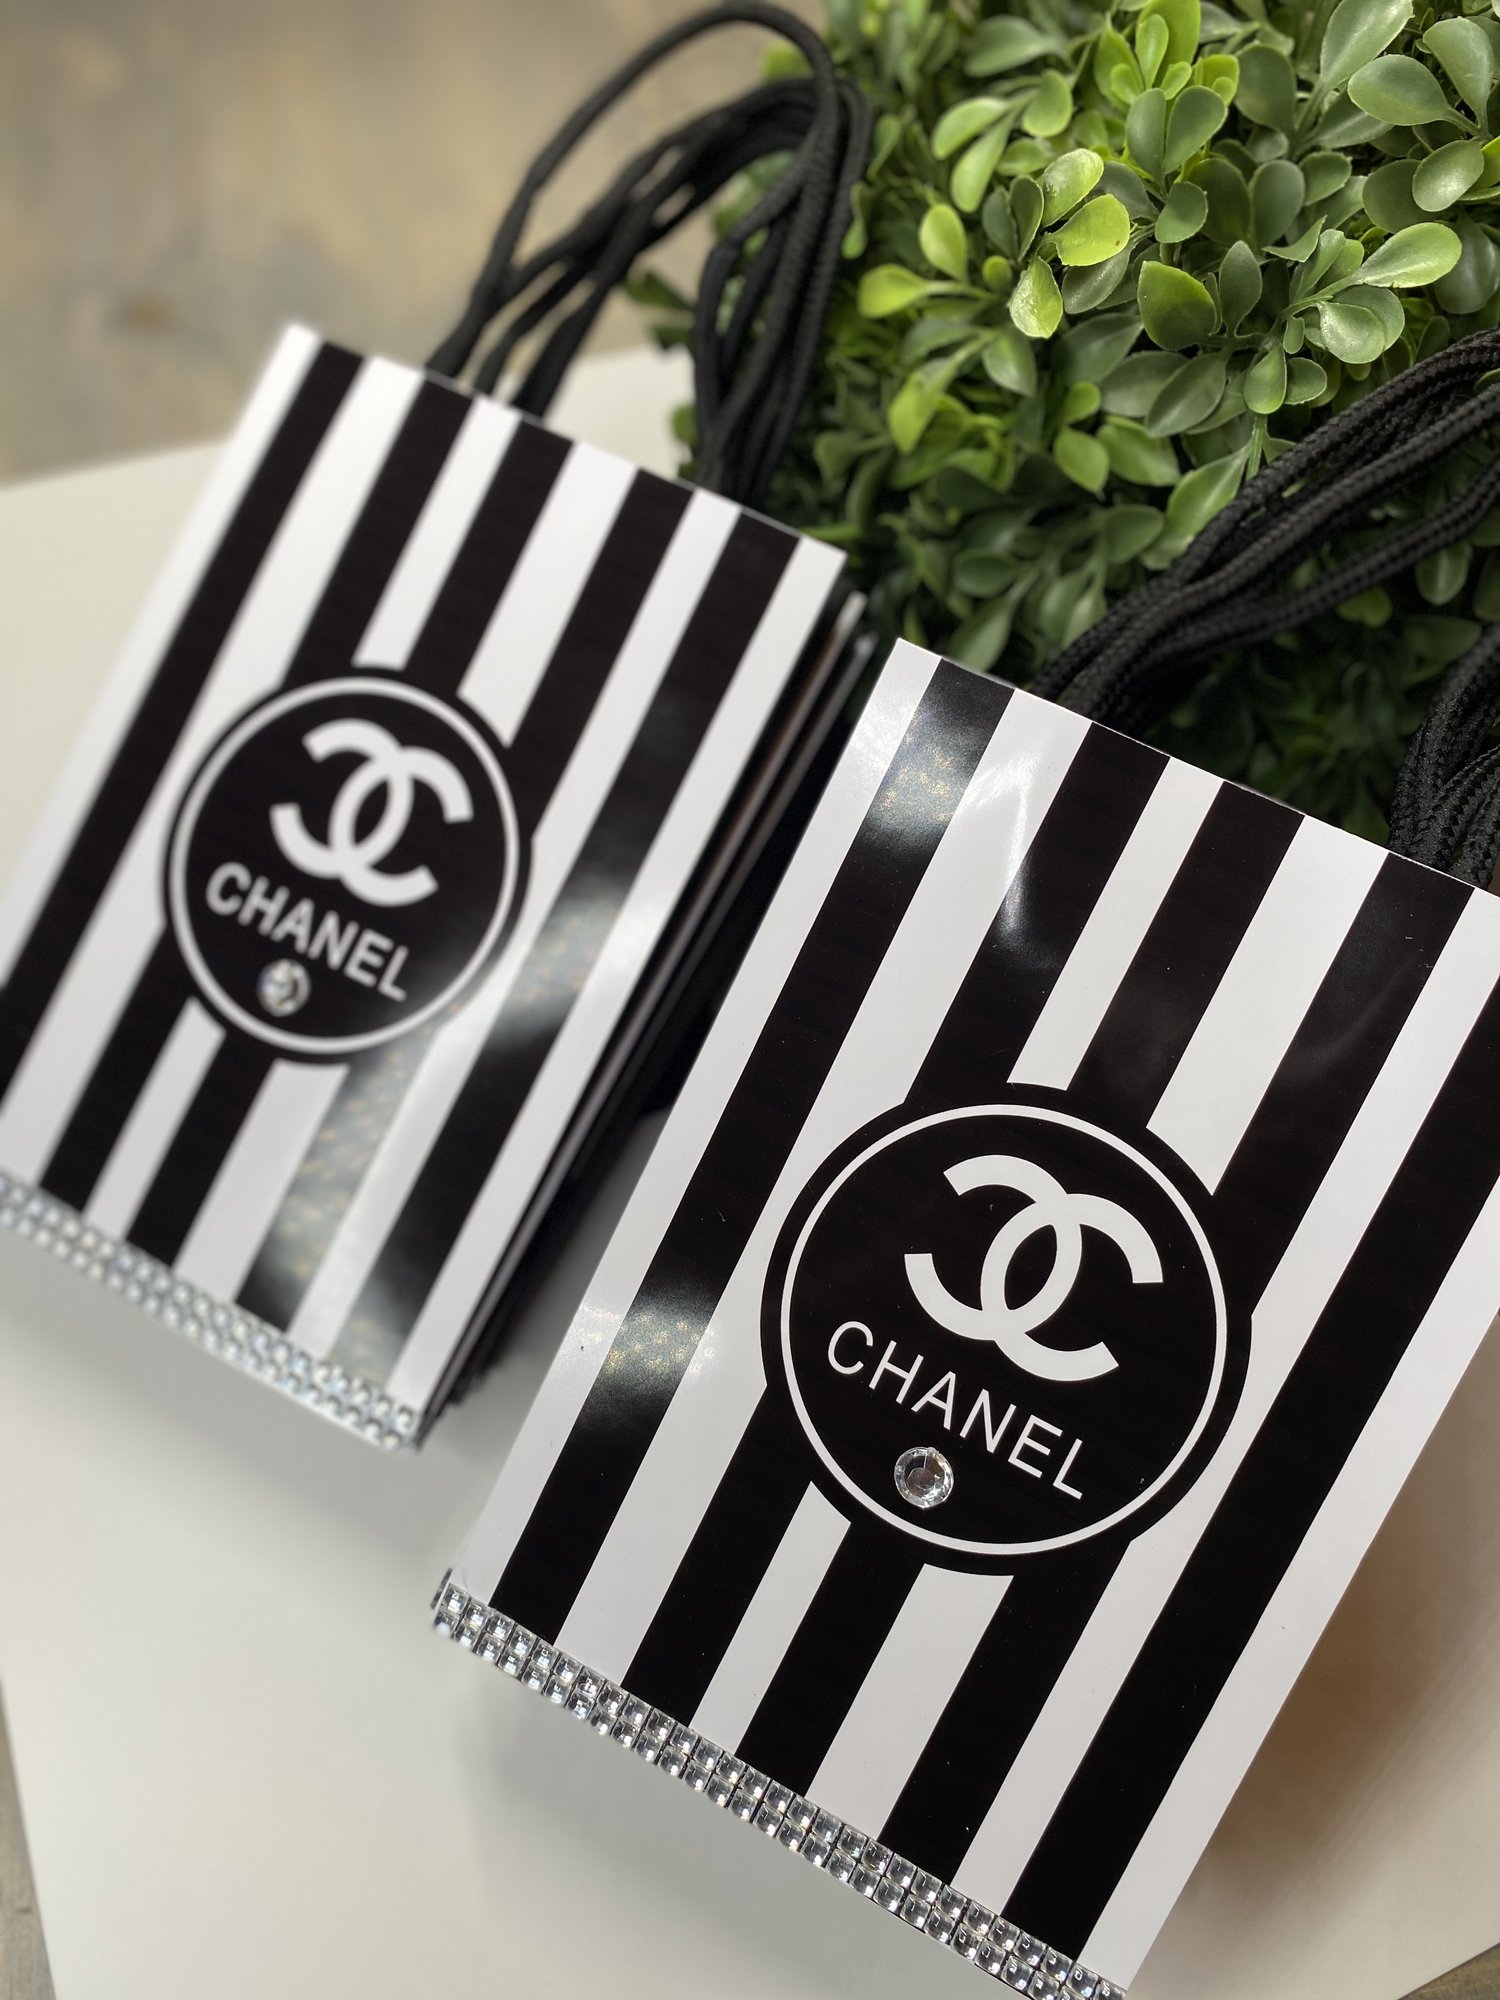 CHANEL, Accessories, Chanel Gift Bag